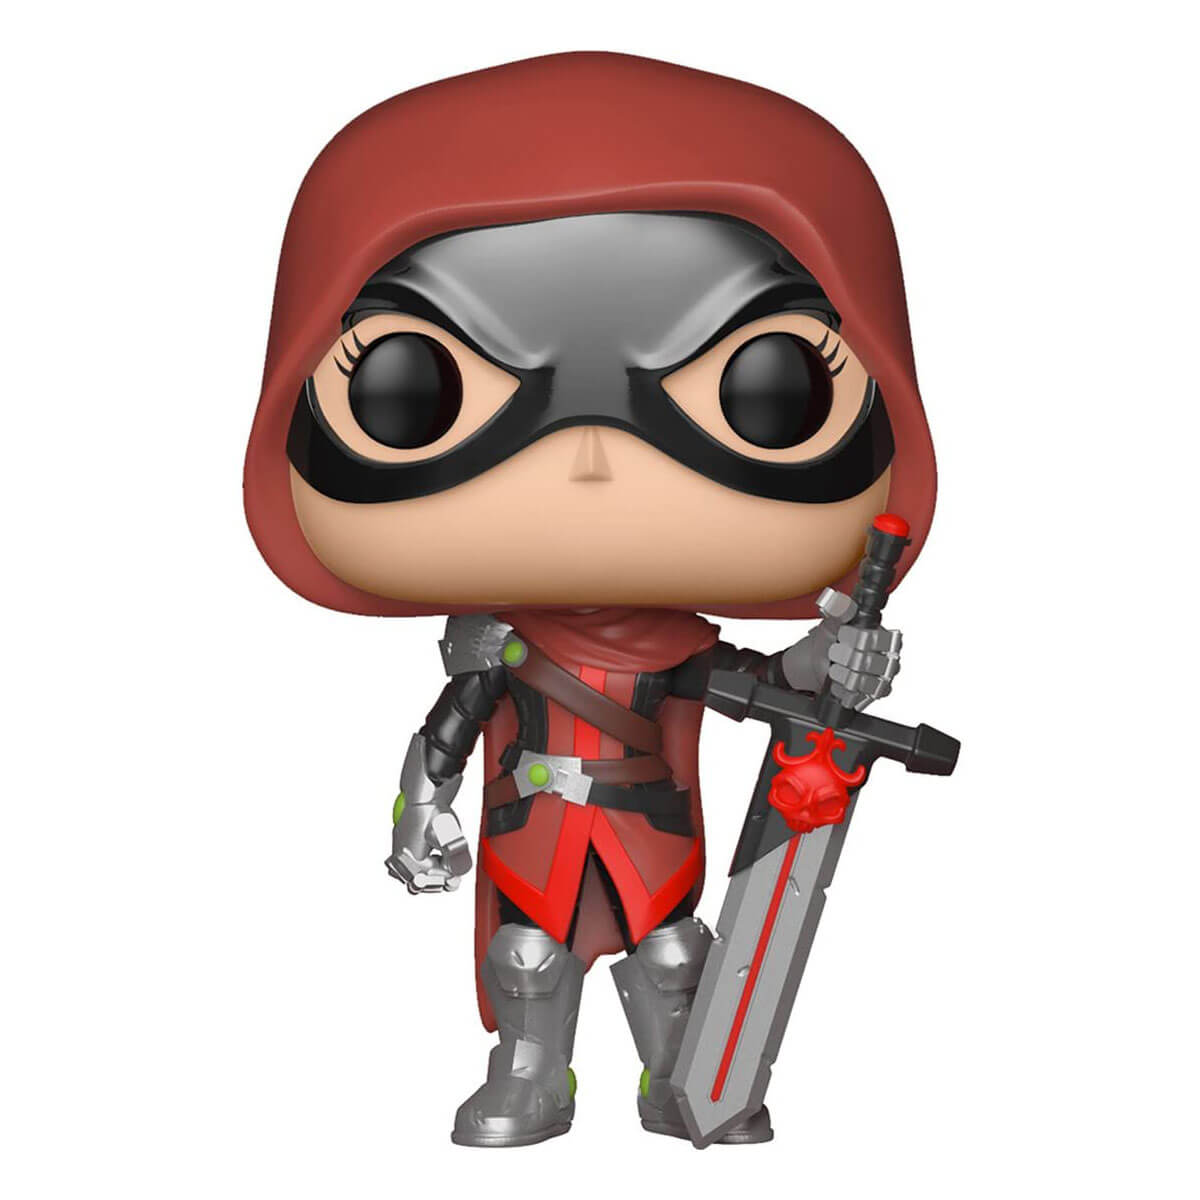 Front view of the Funko POP Contest Of Champions Guillotine #298 figure.